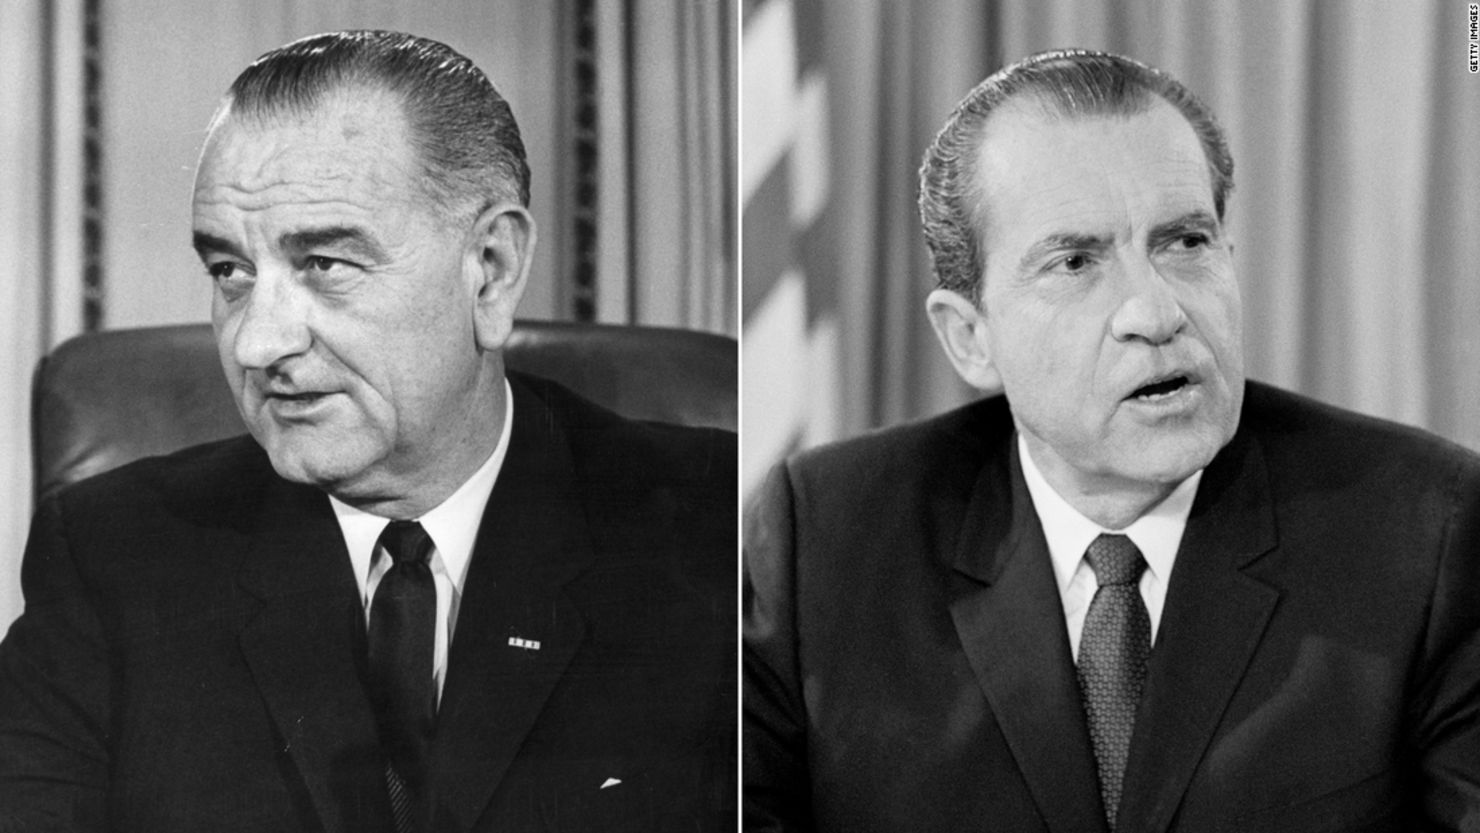 Medicare, Medicaid and Social Security laws passed under President Lyndon B. Johnson and President Richard Nixon continue to drive the long-term federal debt problem.